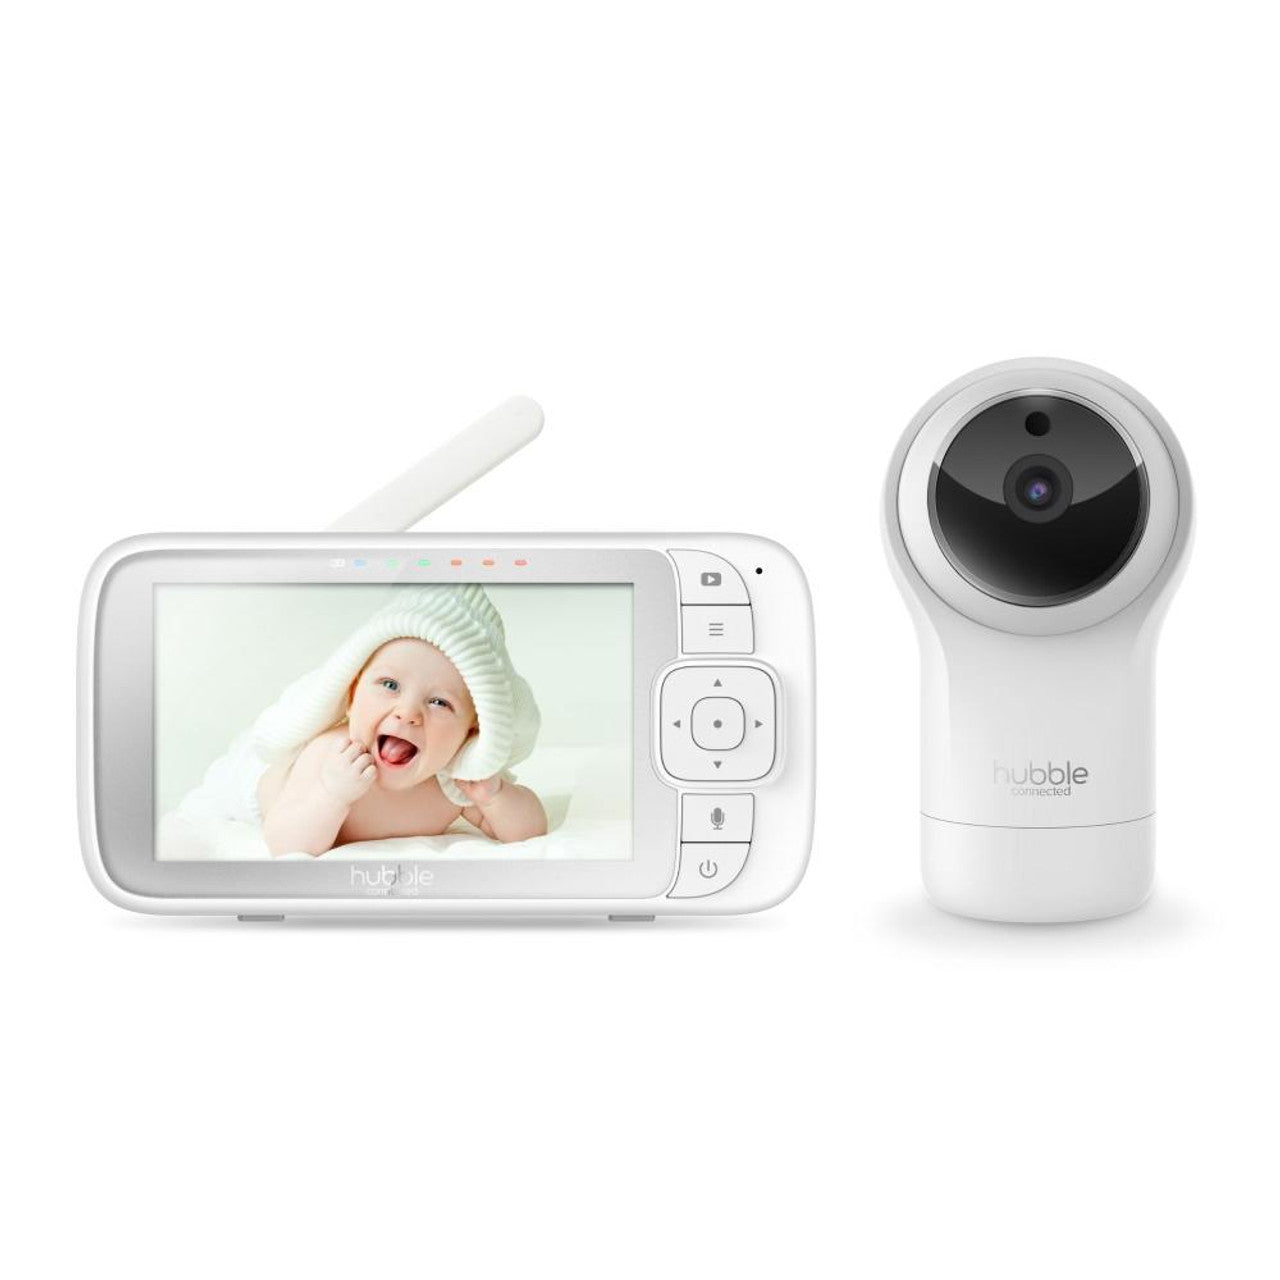 Hubble Nursery View Pro 5" Video Monitor - White | 5012786050259 from Hubble - DID Electrical